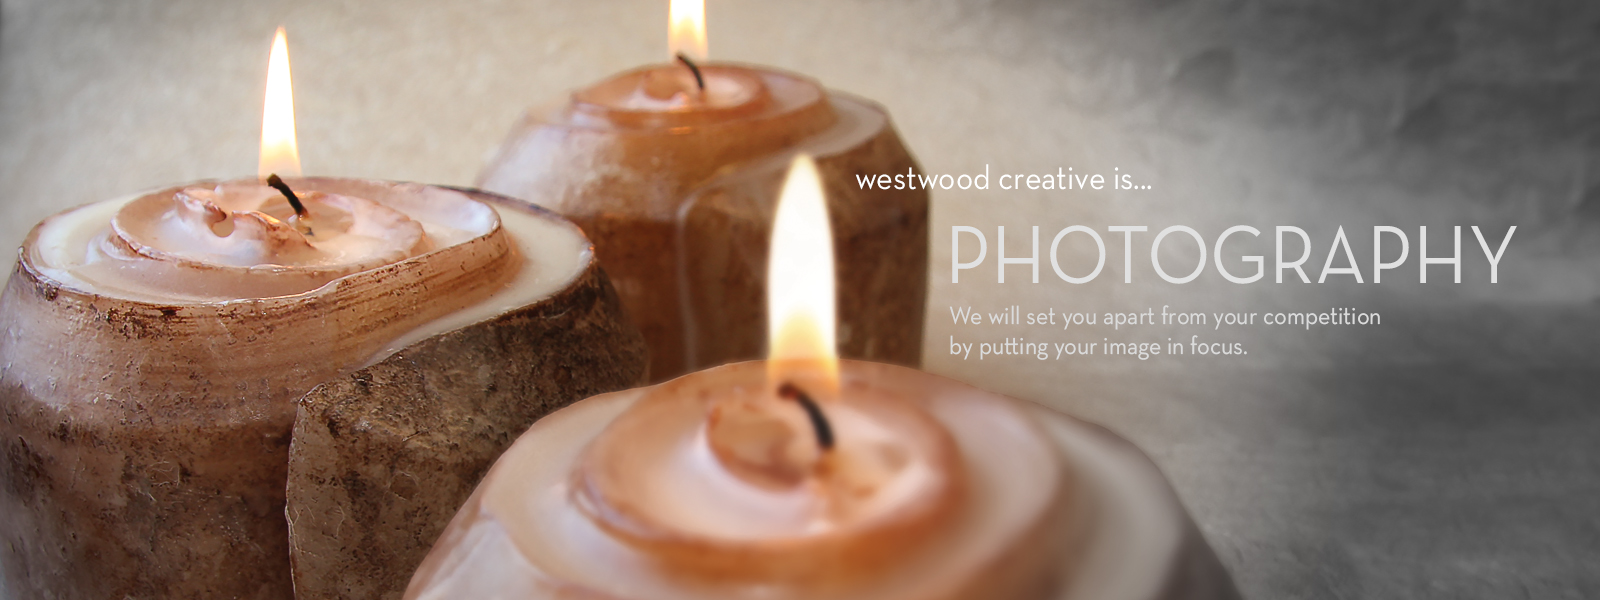 Westwood Creative Photography Services